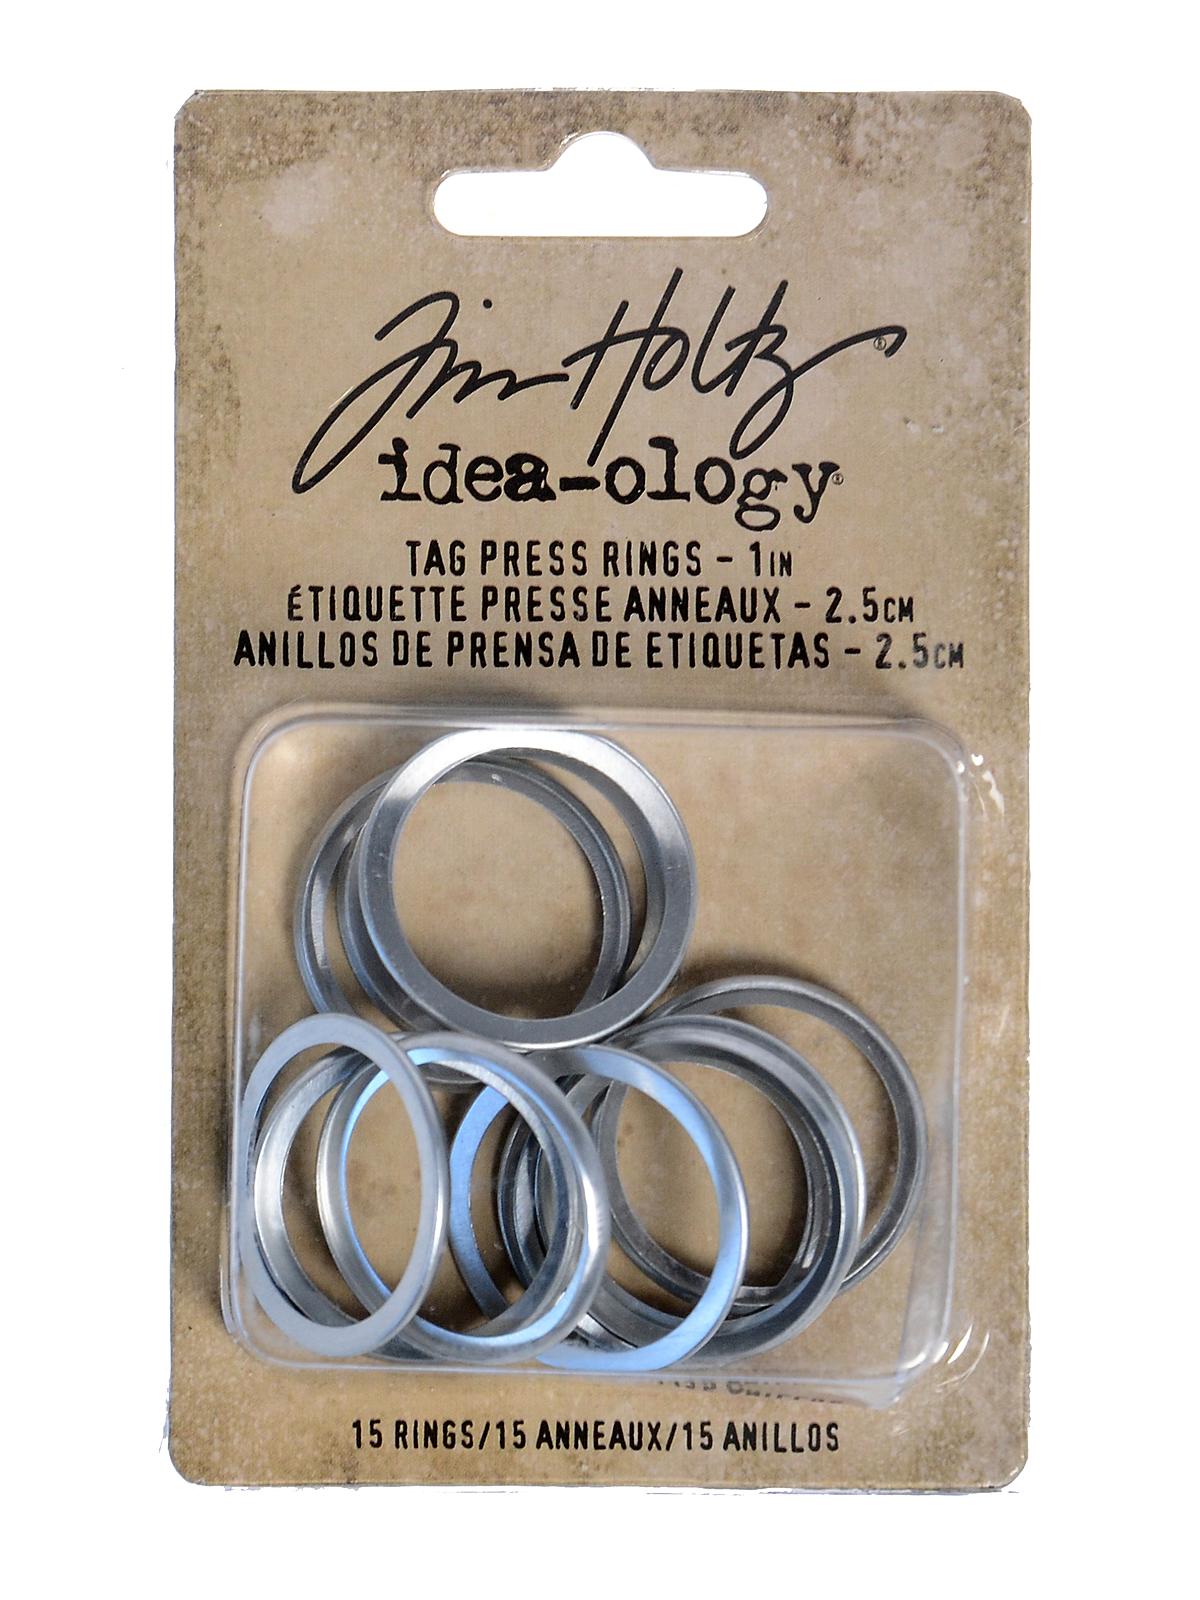 Ideaology Tag Press Pack Of 15 Rings 1 In.